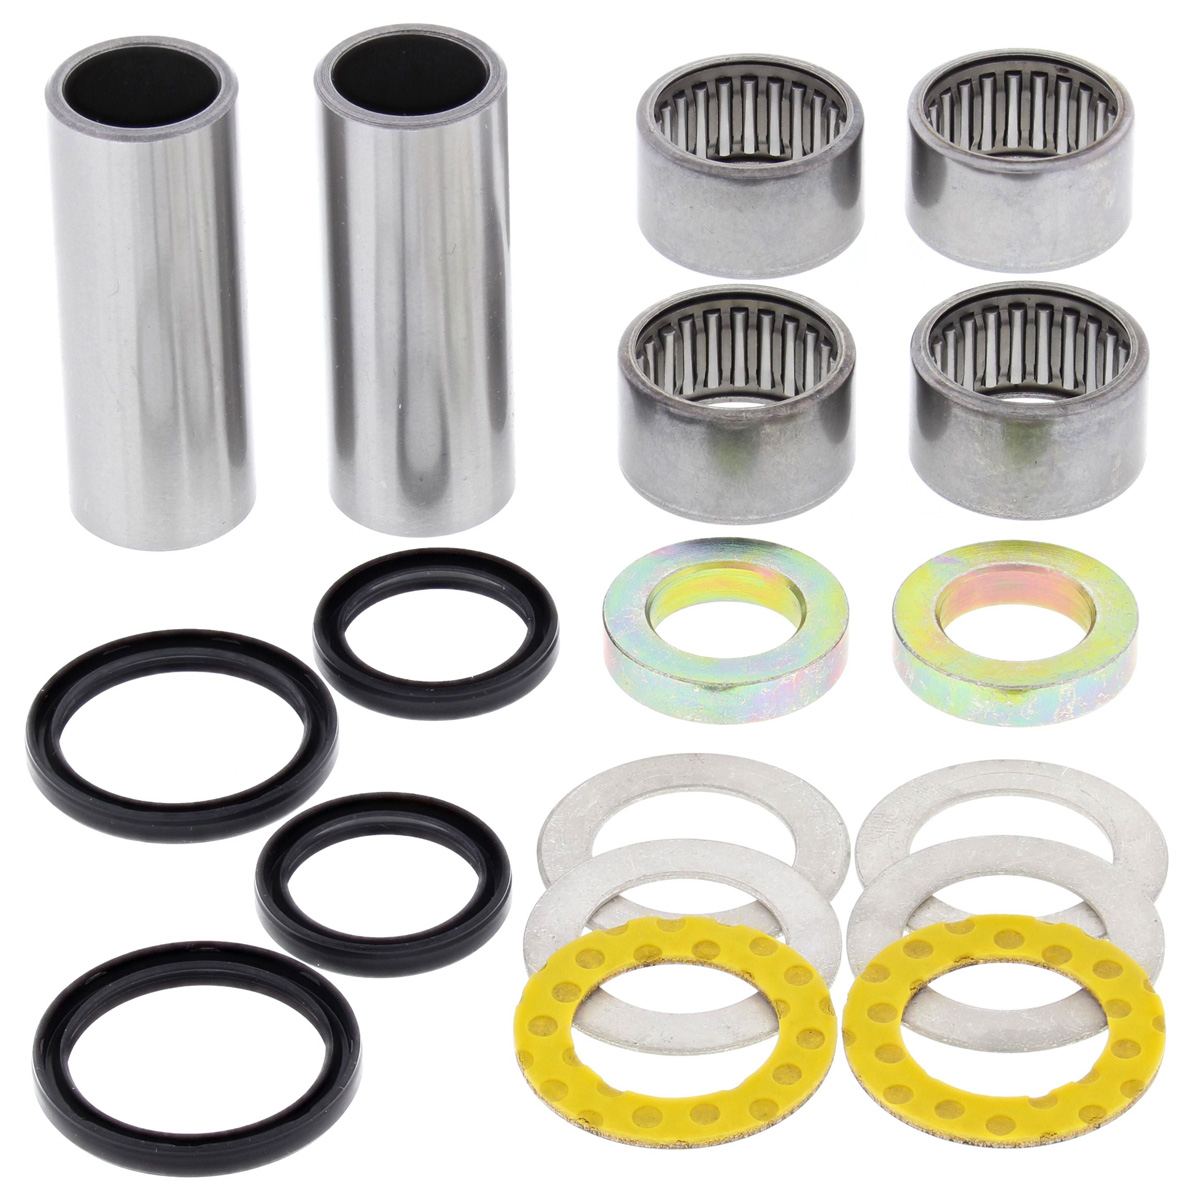 All Balls Swing Arm Bearing Kit Yamaha YZF250 '14-24 - YZF450 '10-24 - WRF250/450 - achterbrug lagers kit roulements bras oscillant schwingenlager-kit